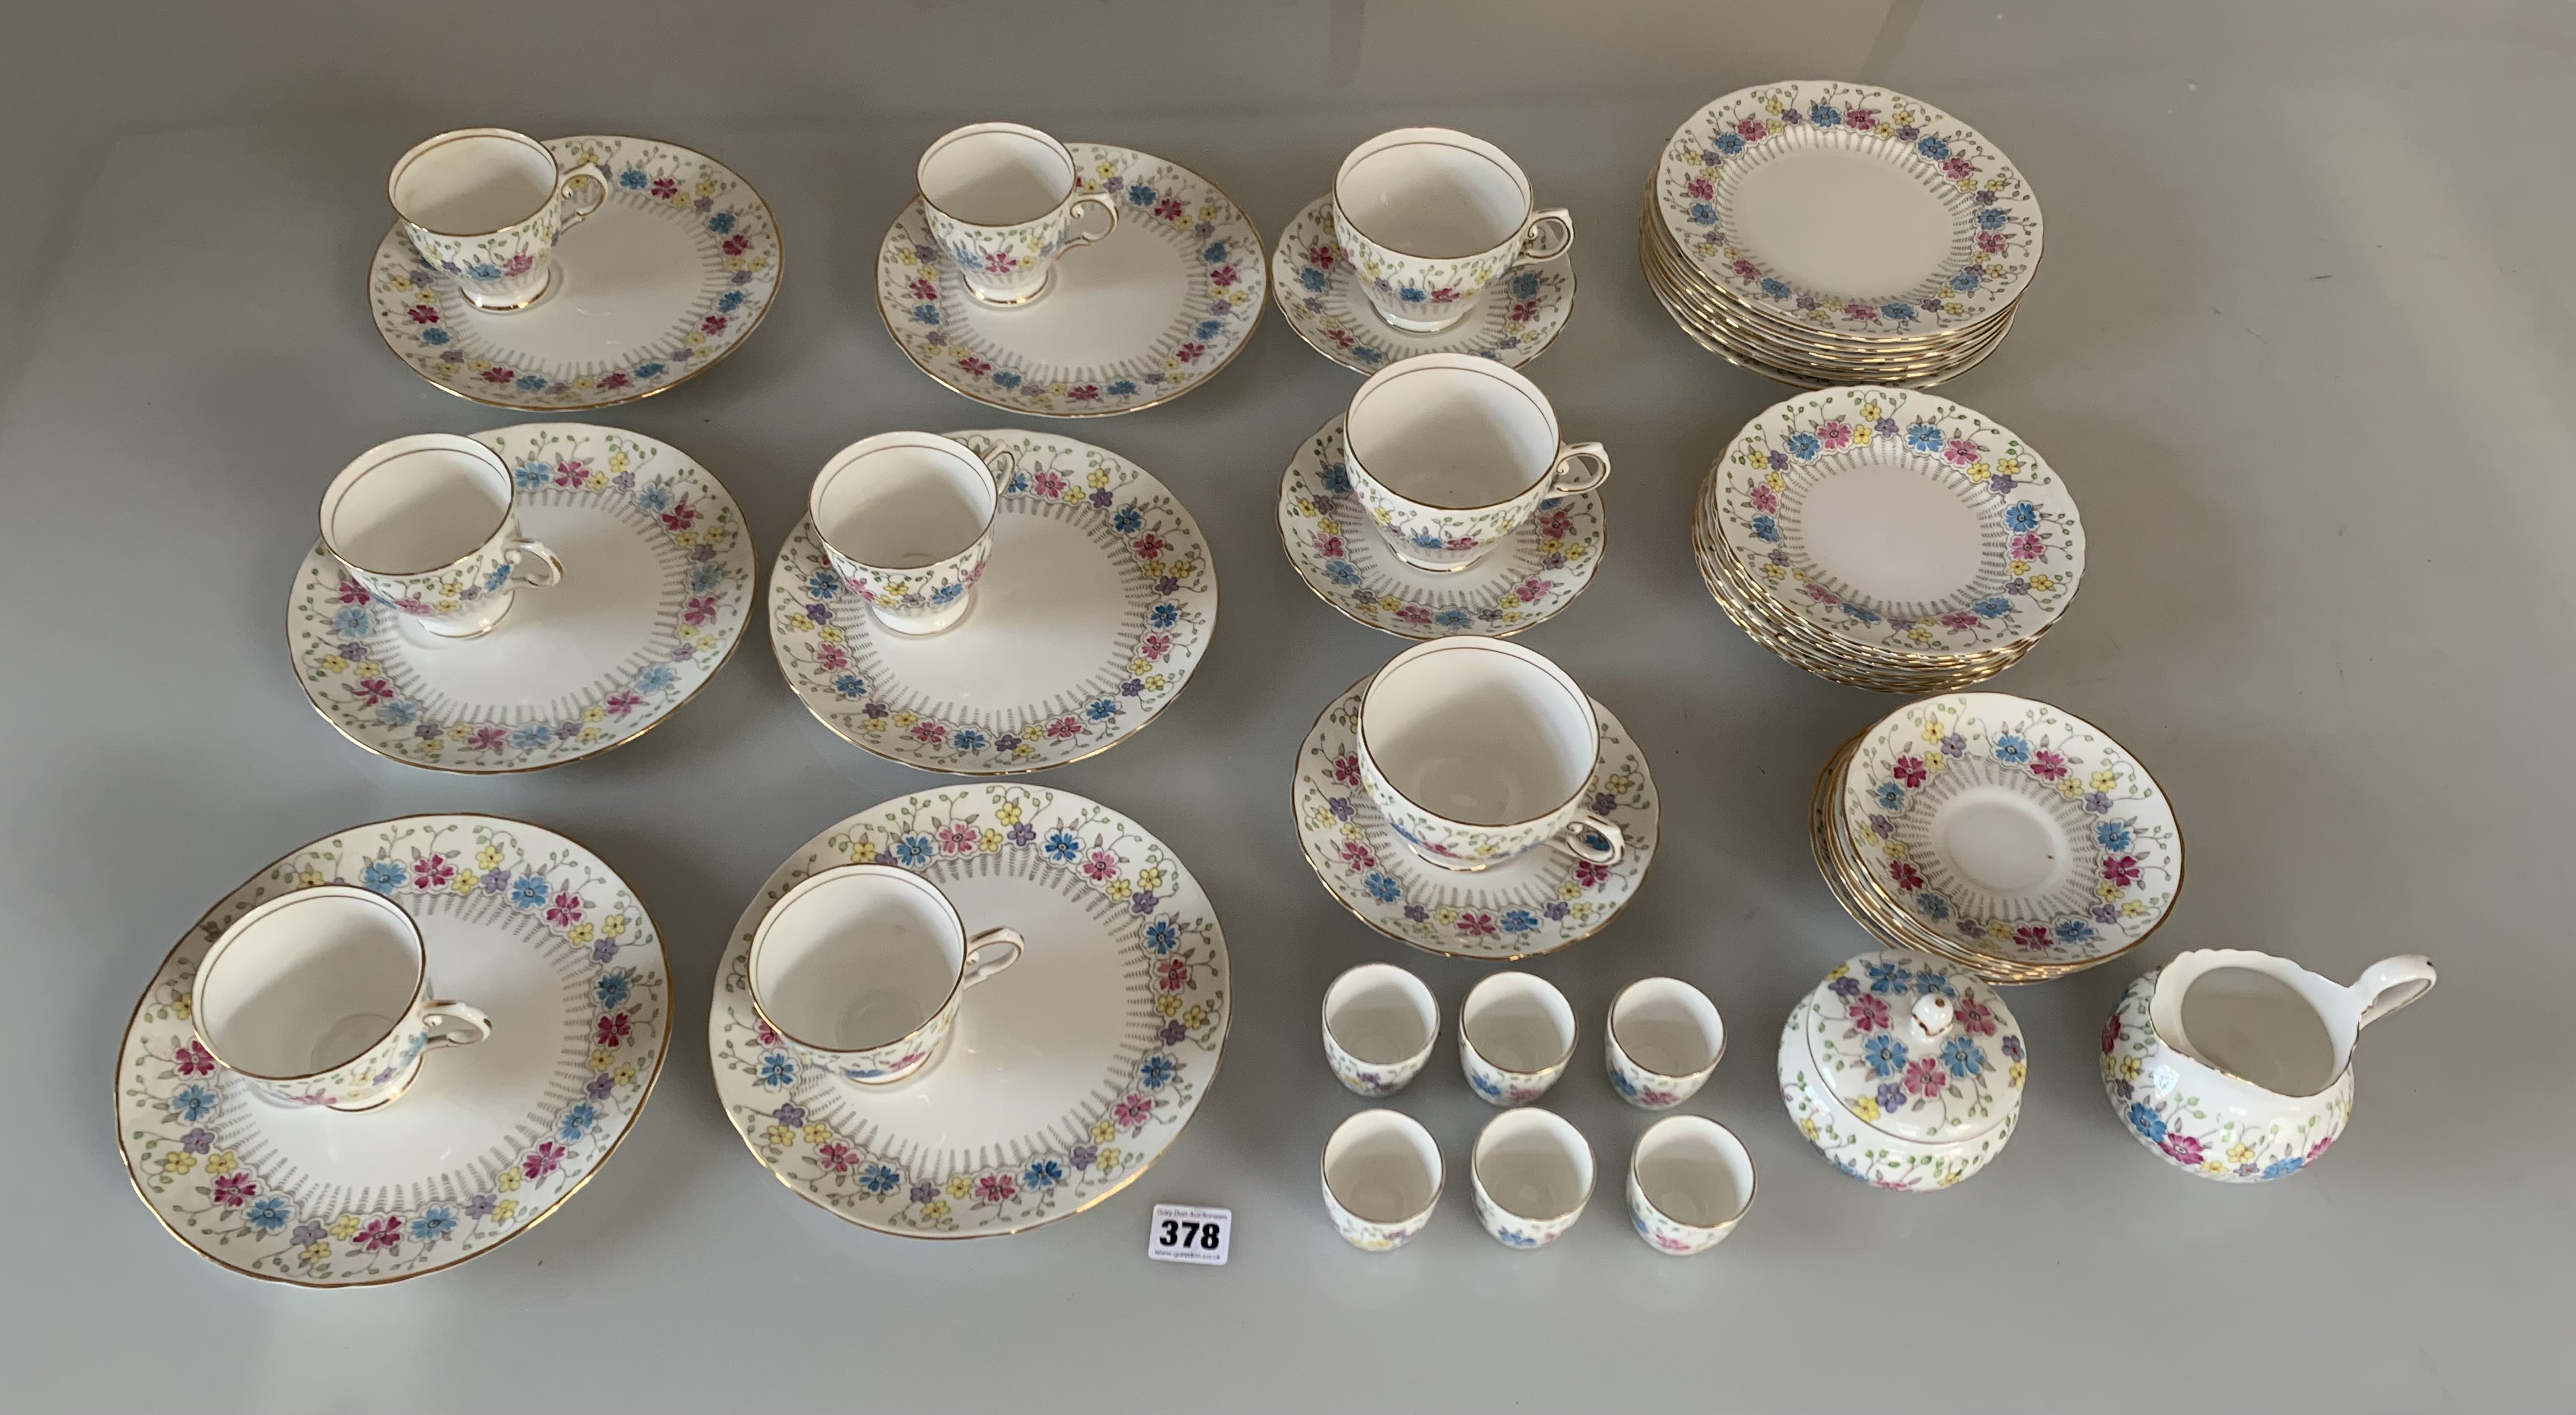 44 piece part Tuscan china tea service comprising 6 cups, 6 saucers, 3 large cups, 3 large - Image 2 of 5